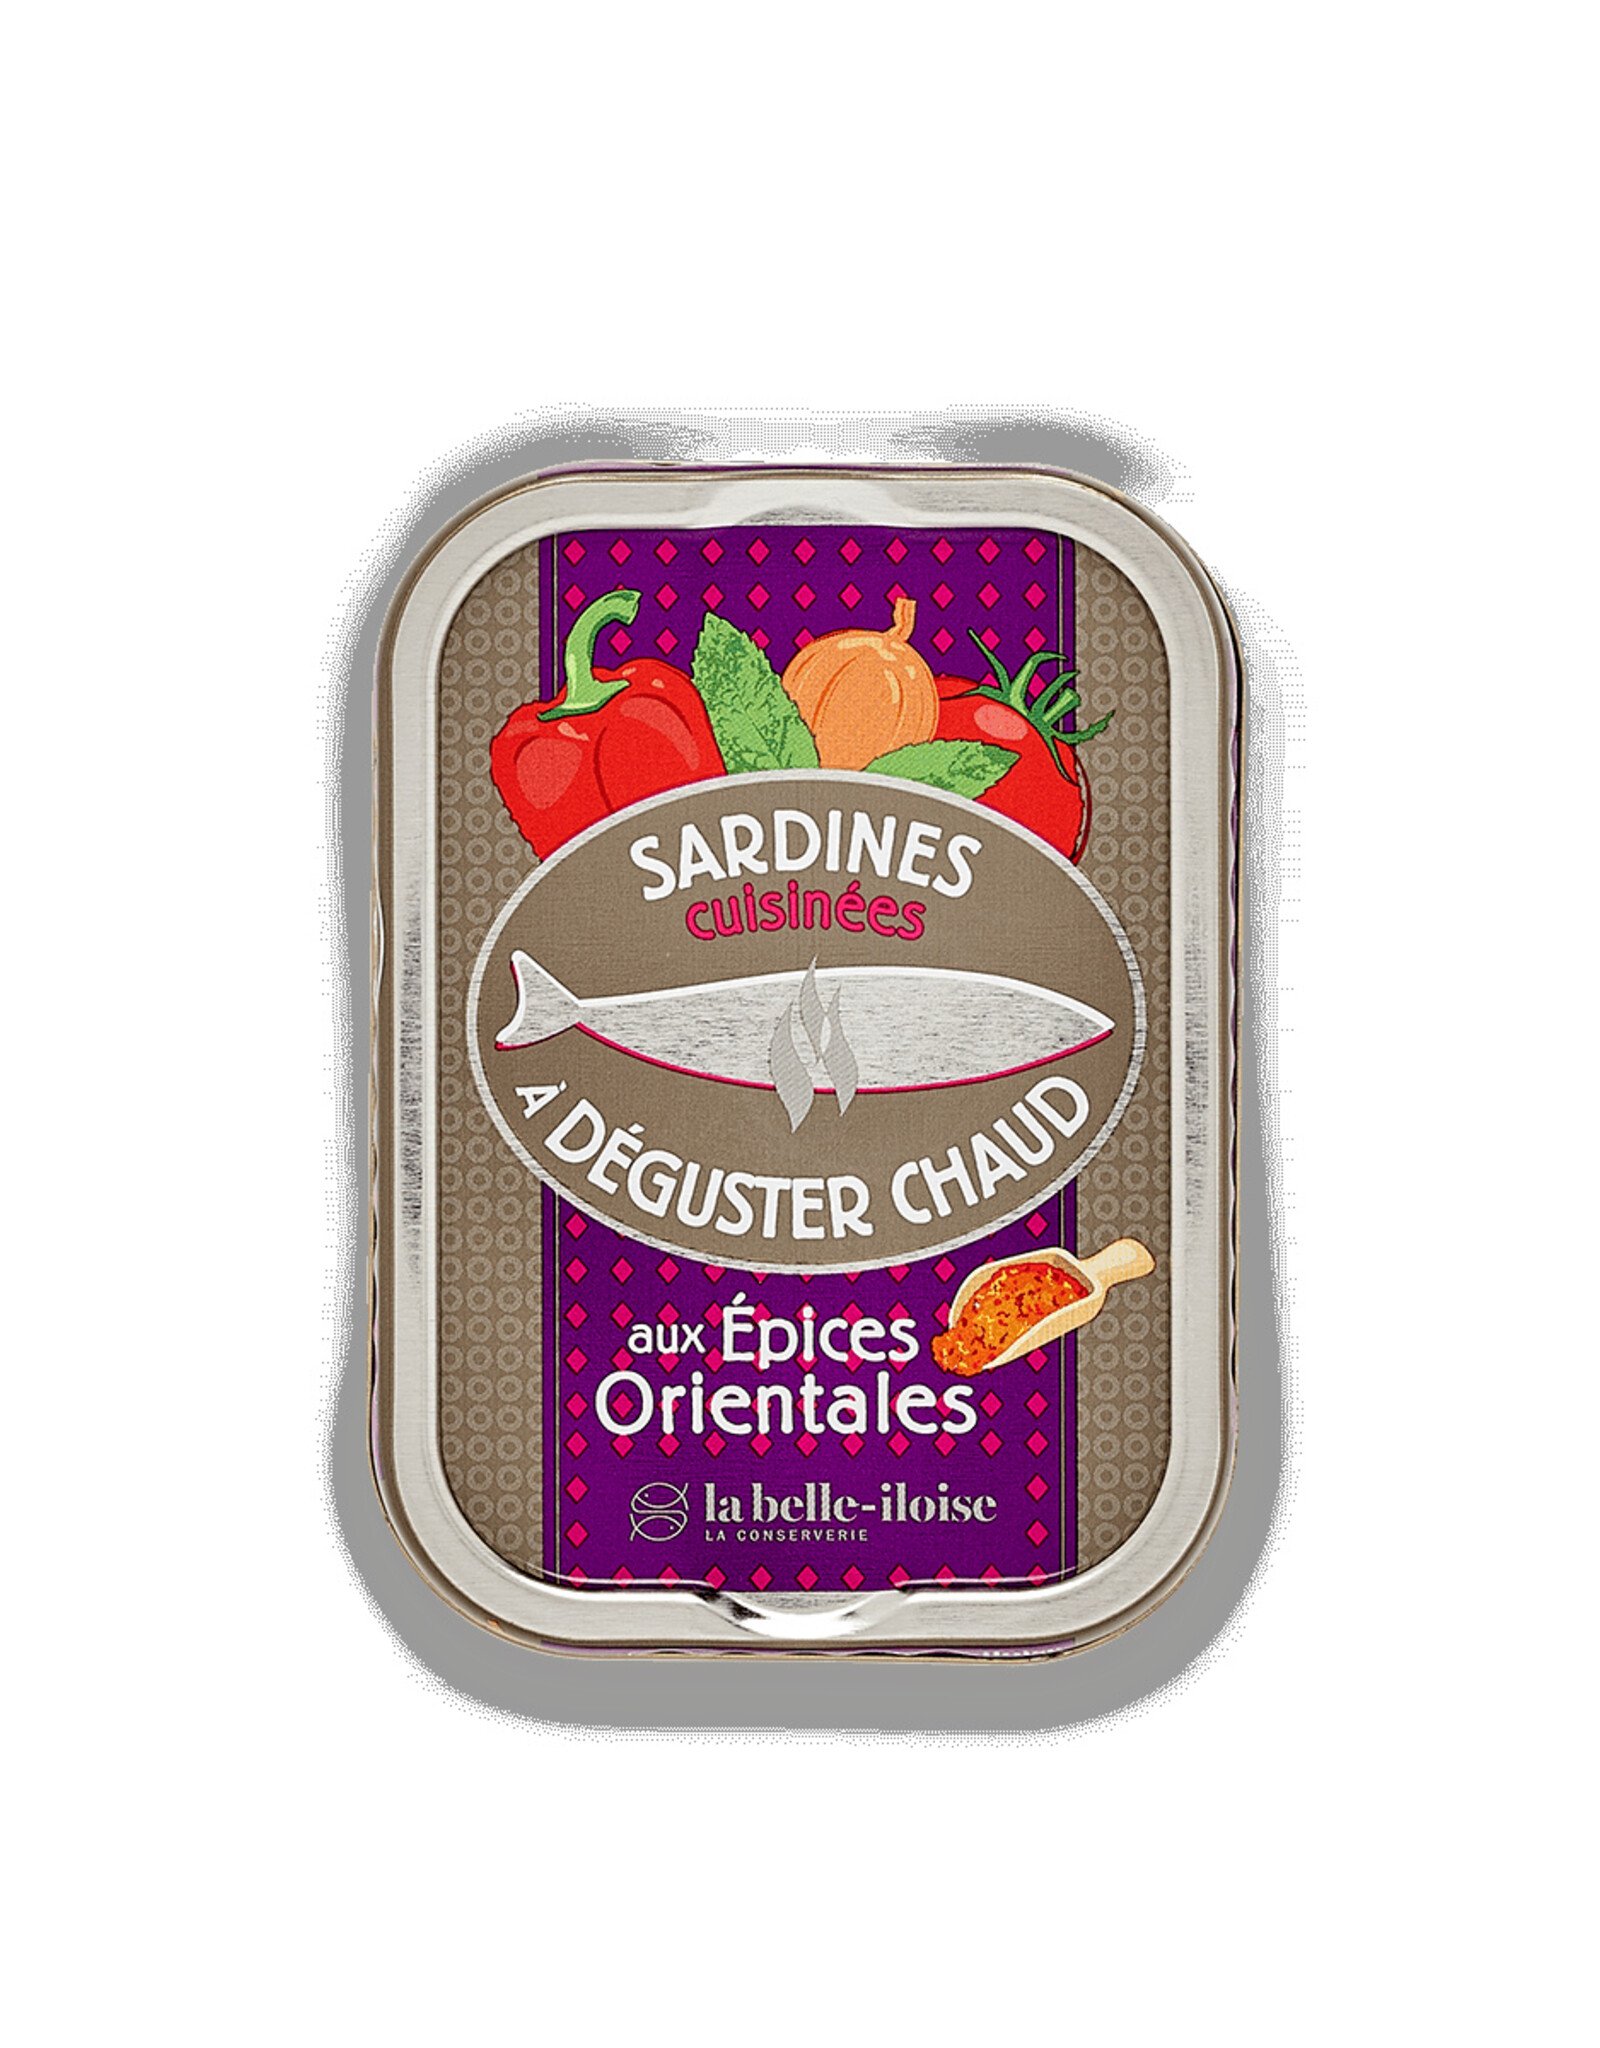 La Belle Iloise Sardines Cuisines Epices- Cooked Sardines with Spices